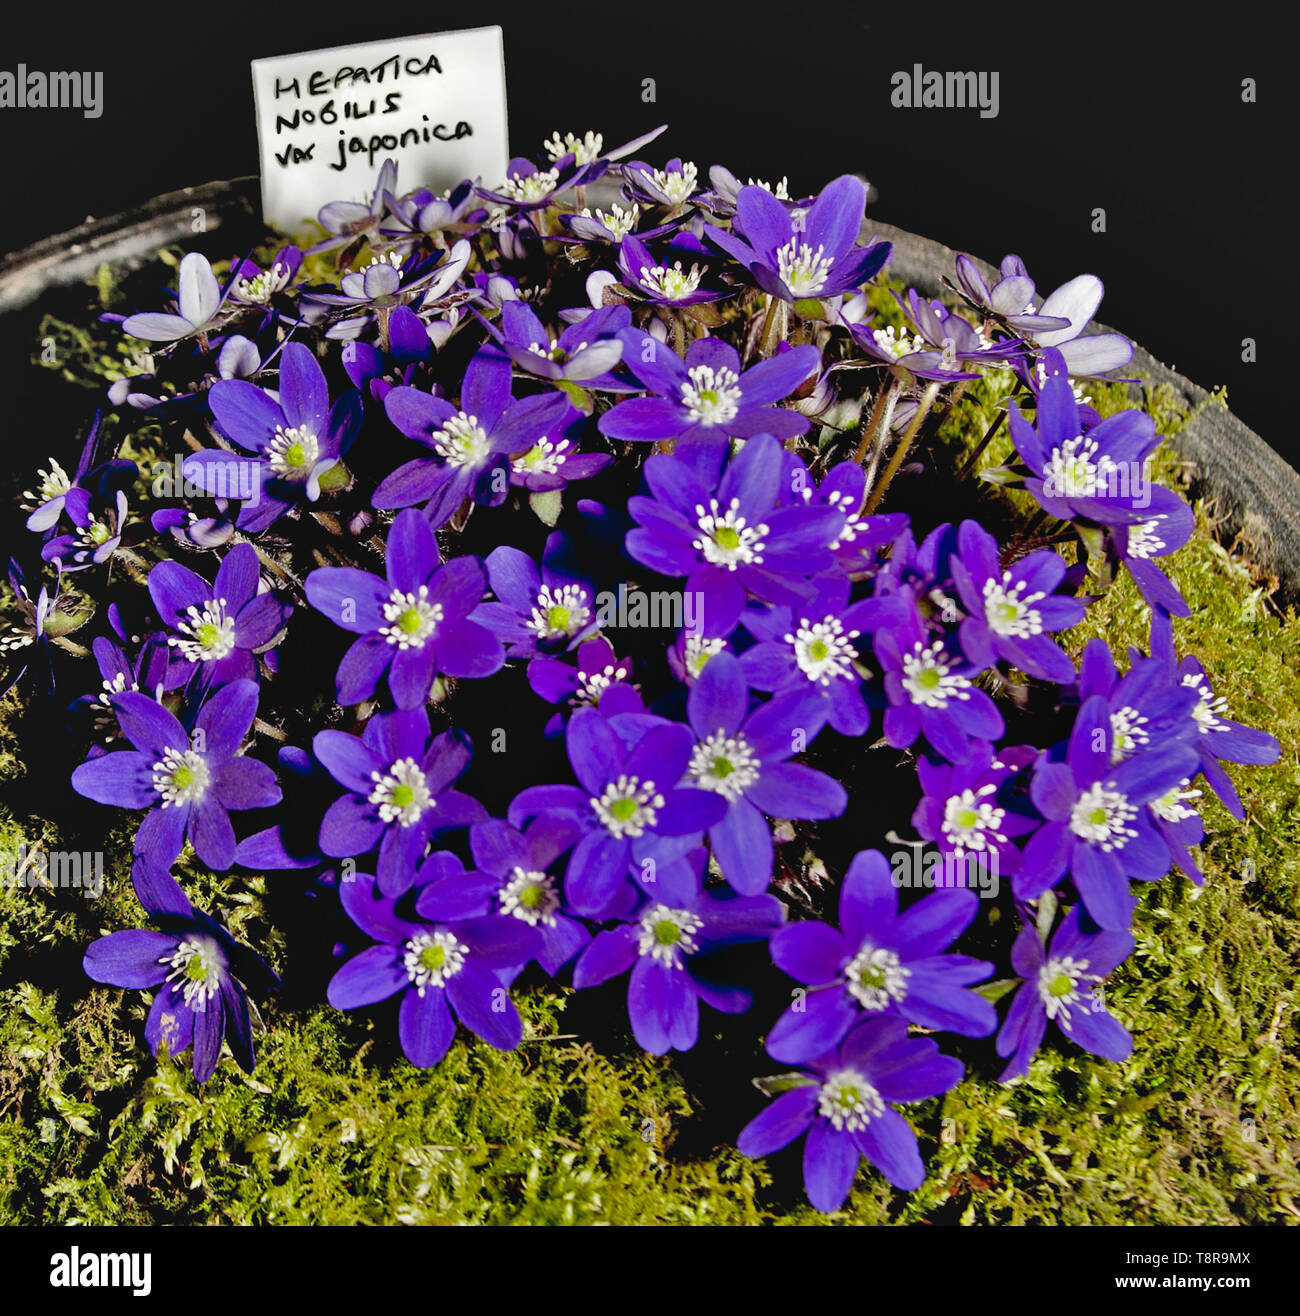 Hepatica nobilis var. japonica  a hardy alpine plant suitable for rockeries grown as a container plant for show. Stock Photo